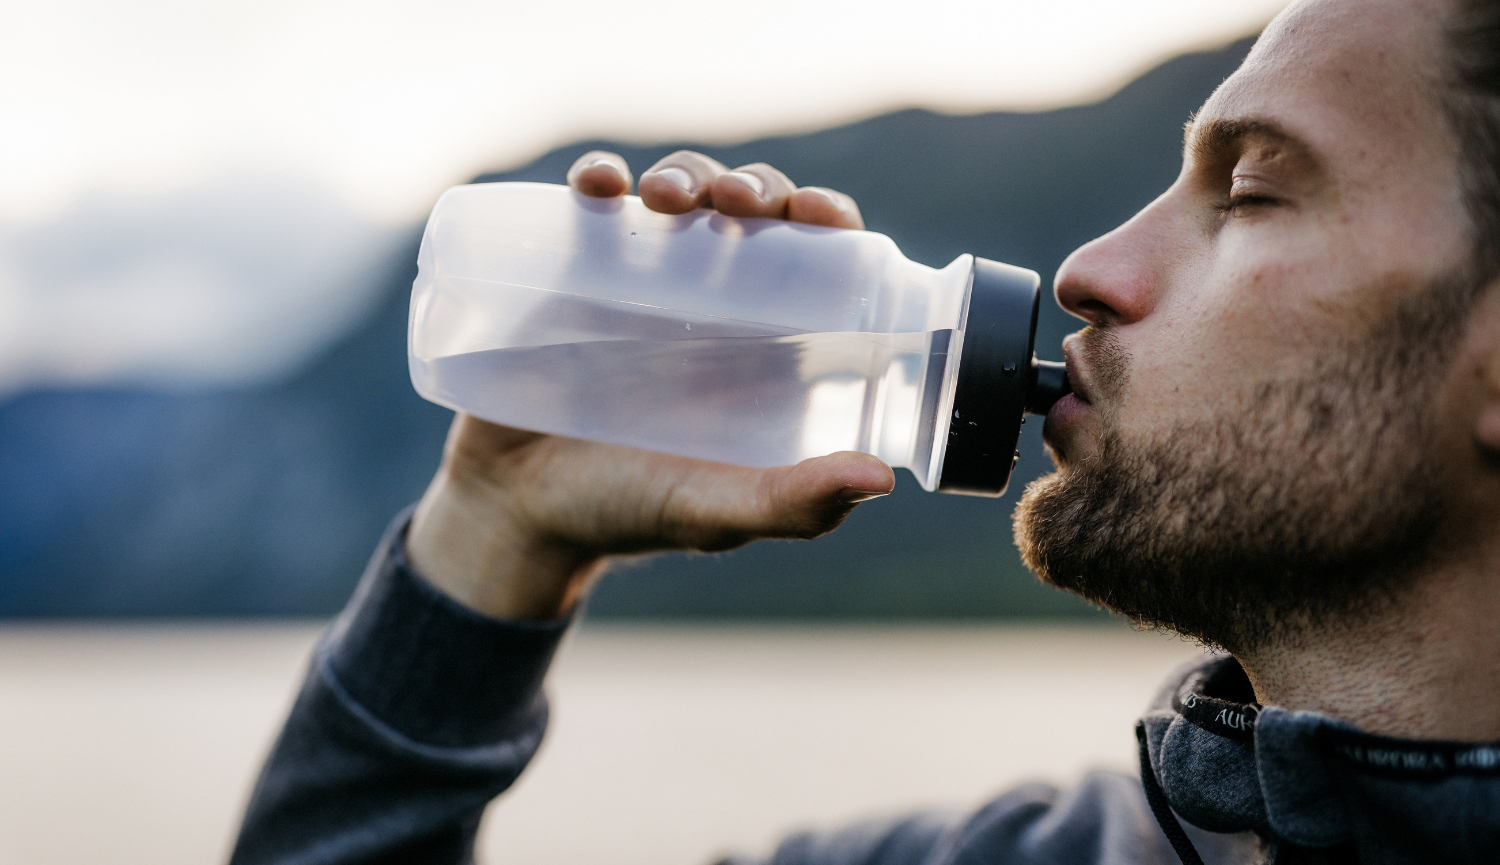 TIPS FOR OPTIMAL HYDRATION